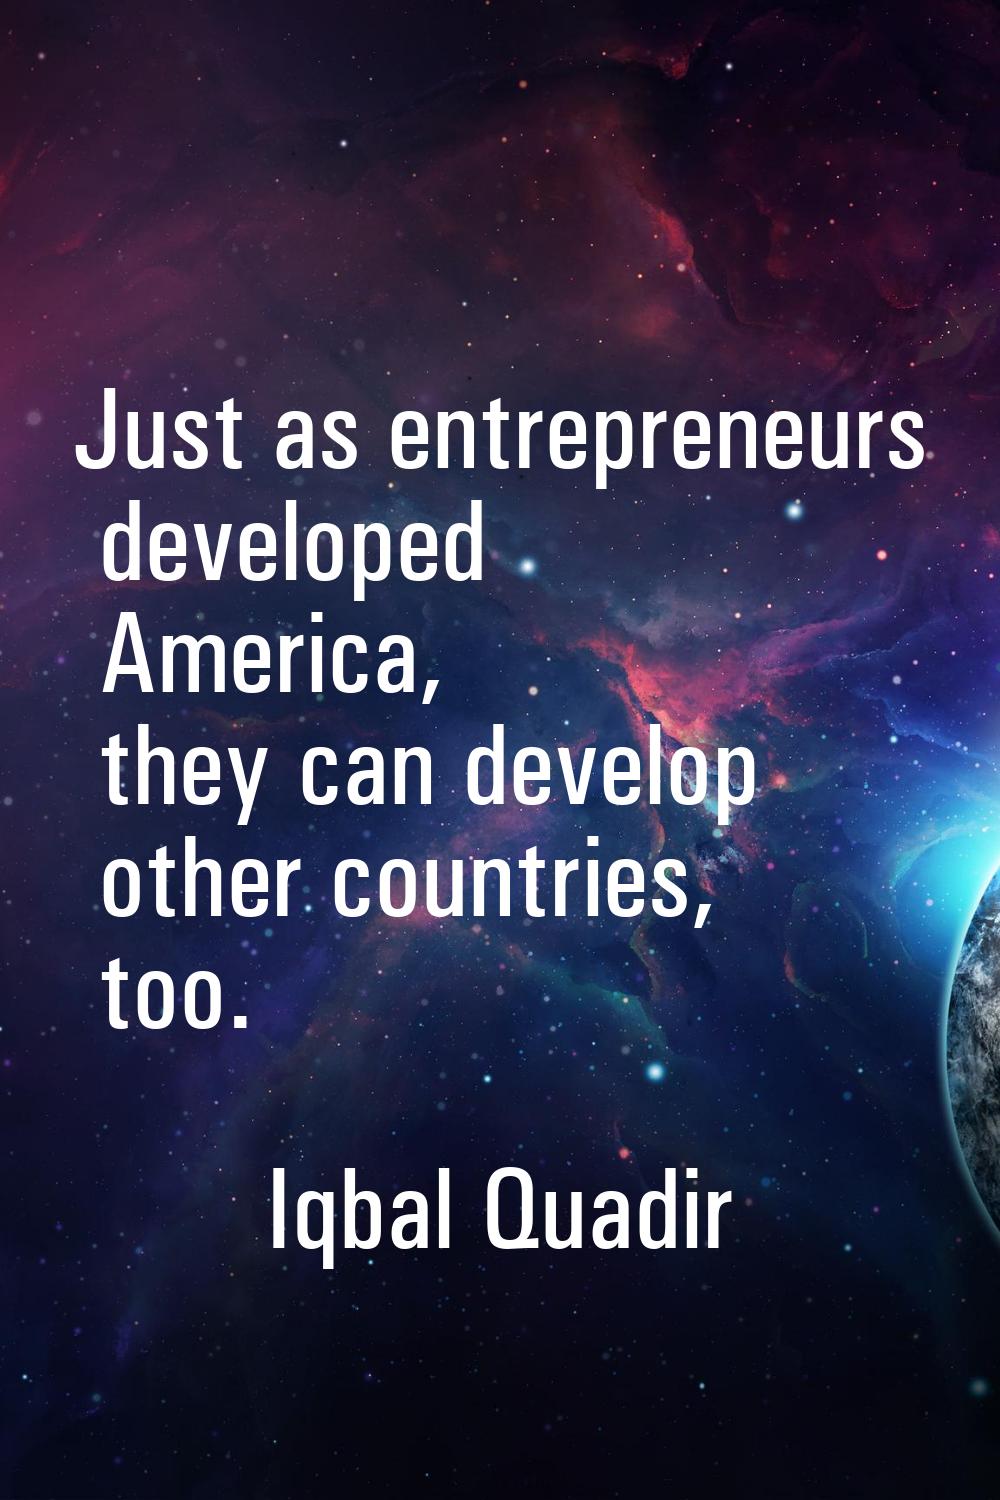 Just as entrepreneurs developed America, they can develop other countries, too.